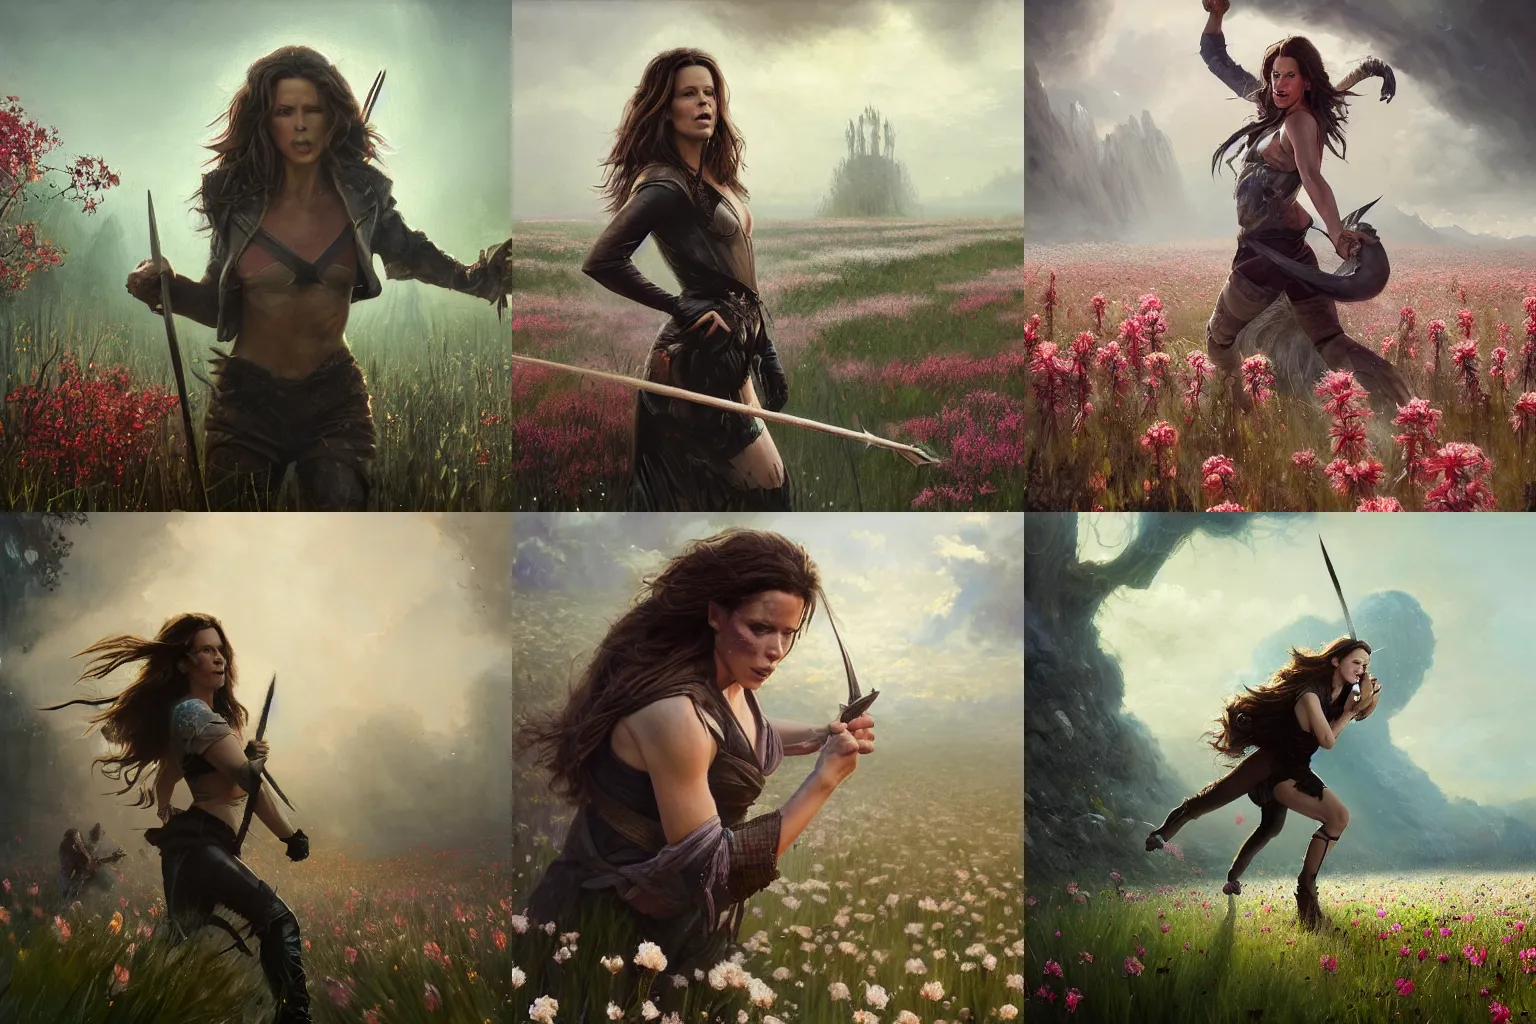 Prompt: kate beckinsale fight with troll by spear on field of flowers, oil painting, Tooth Wu, Greg Rutkowski, RPG portrait, dynamic lighting, fantasy art, High contrast, colorfull, godrays, depth of field, close up, distant view